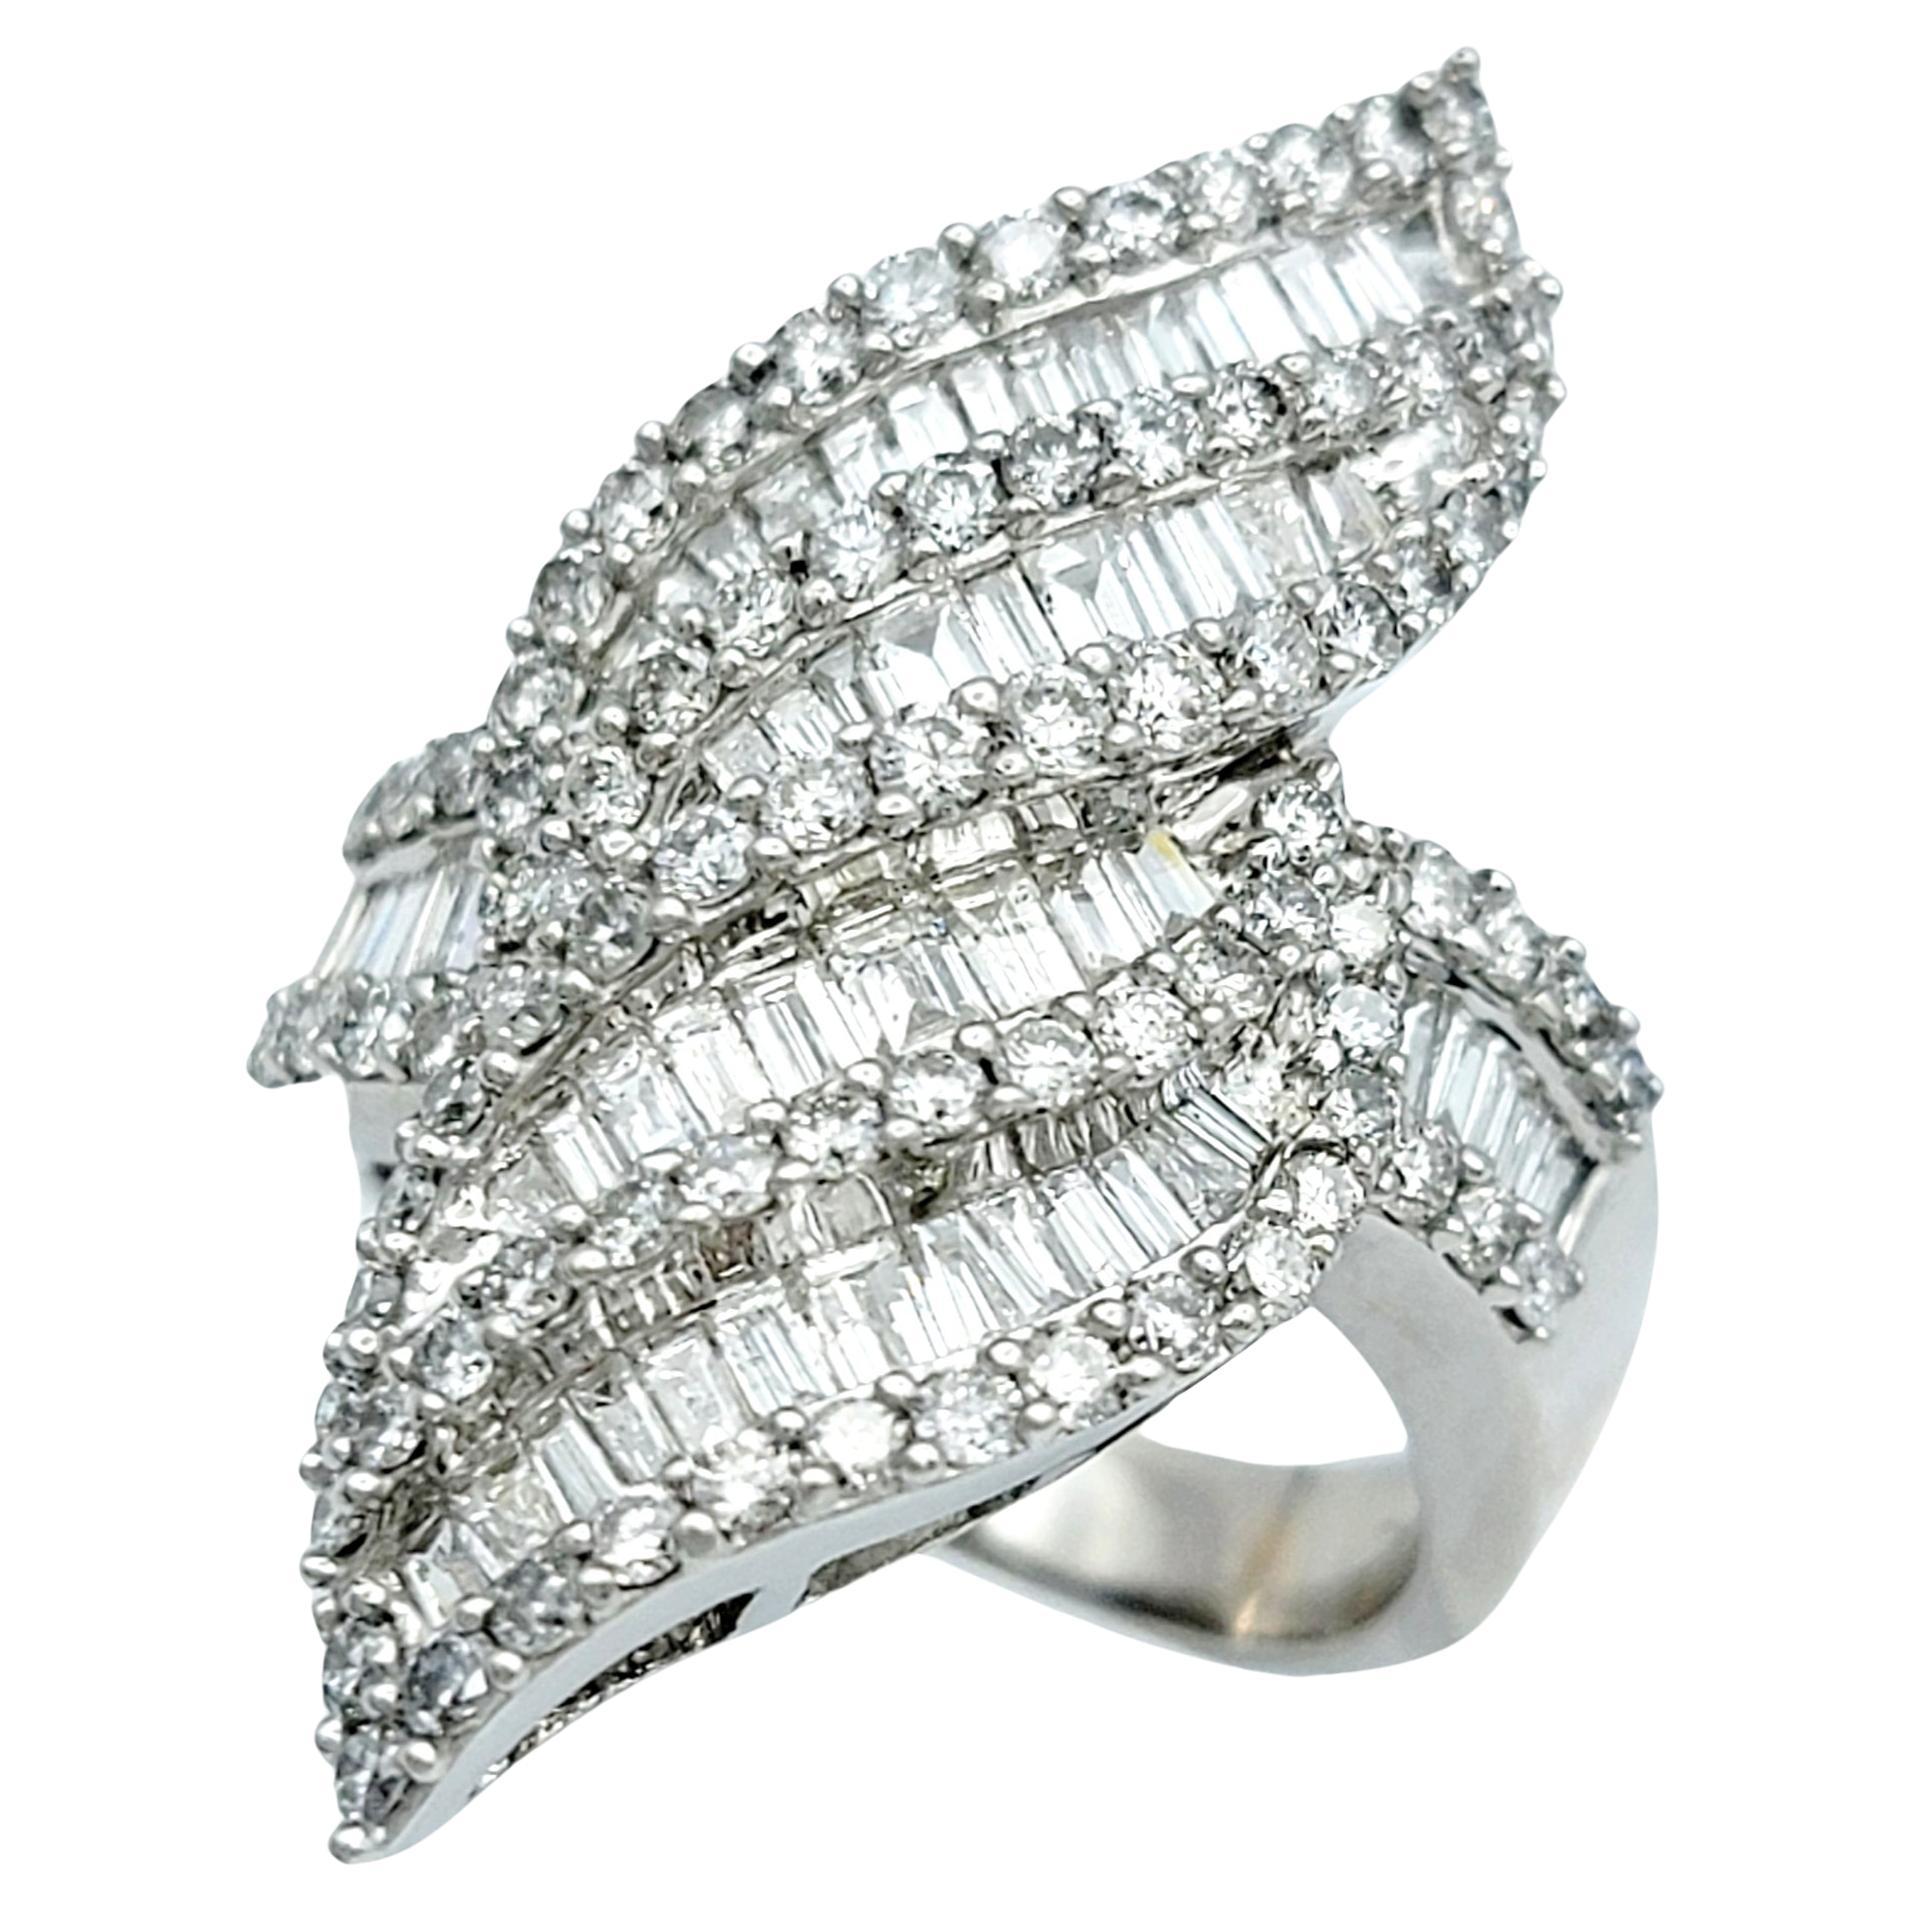 Ring size: 7.5

This lustrous, sparkling cocktail ring is a captivating embodiment of modern artistry and timeless luxury. Crafted in shimmering 14 karat white gold, its design is a marvel, resembling fiery flames that dance with movement. This